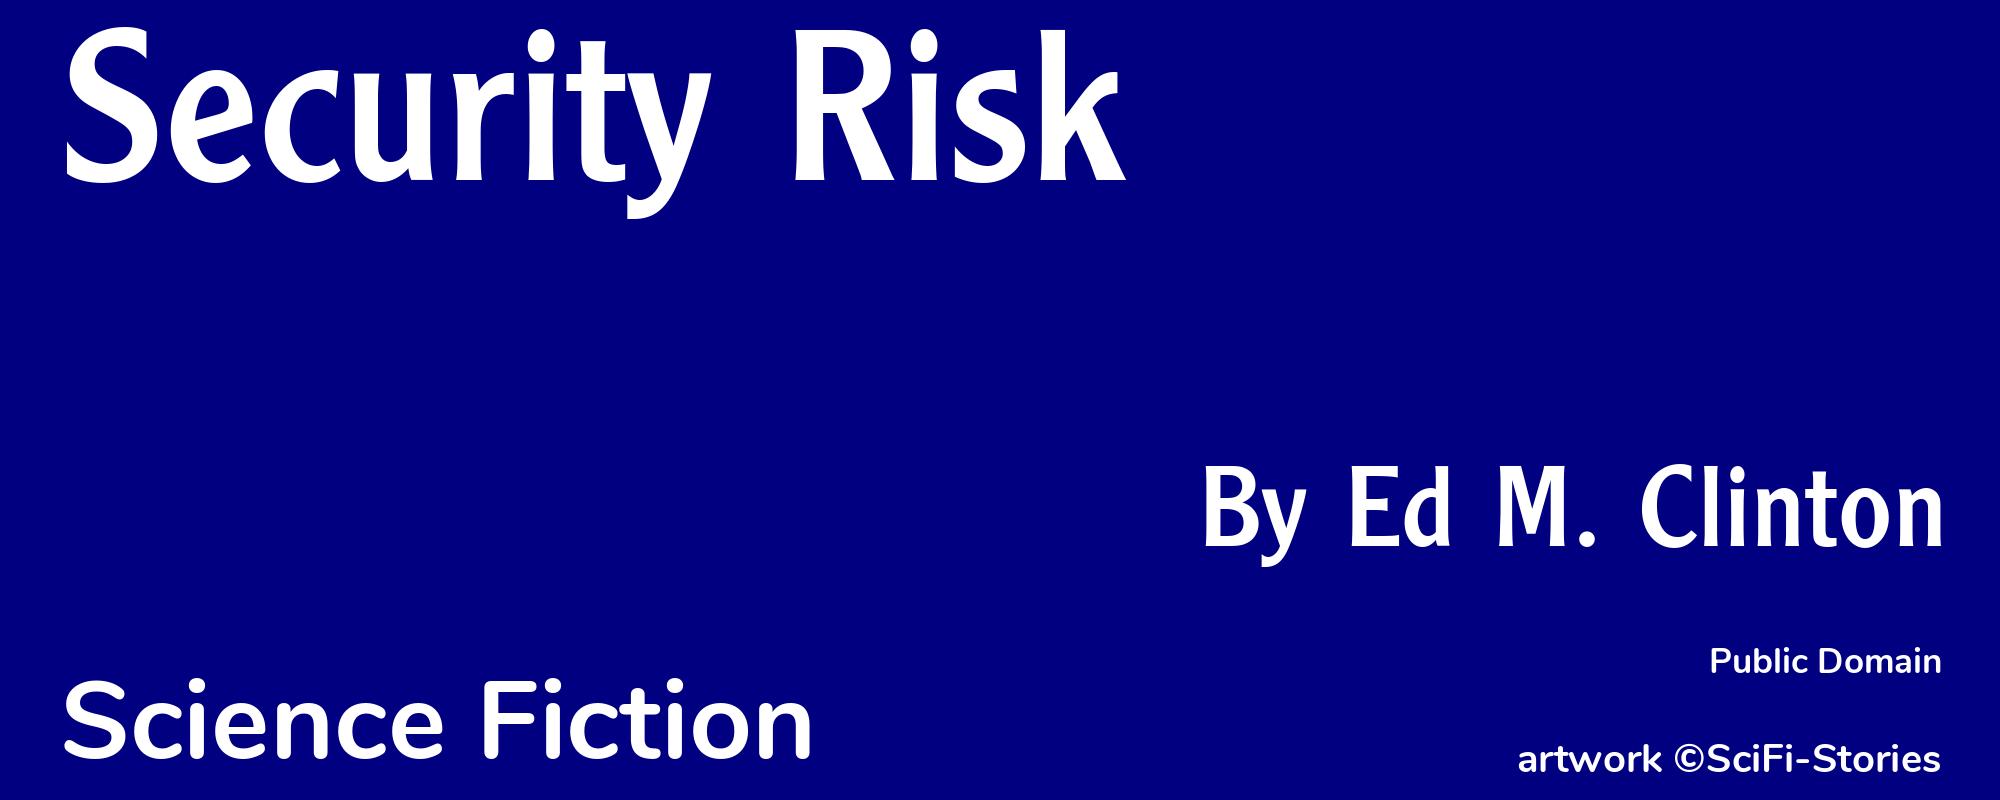 Security Risk - Cover